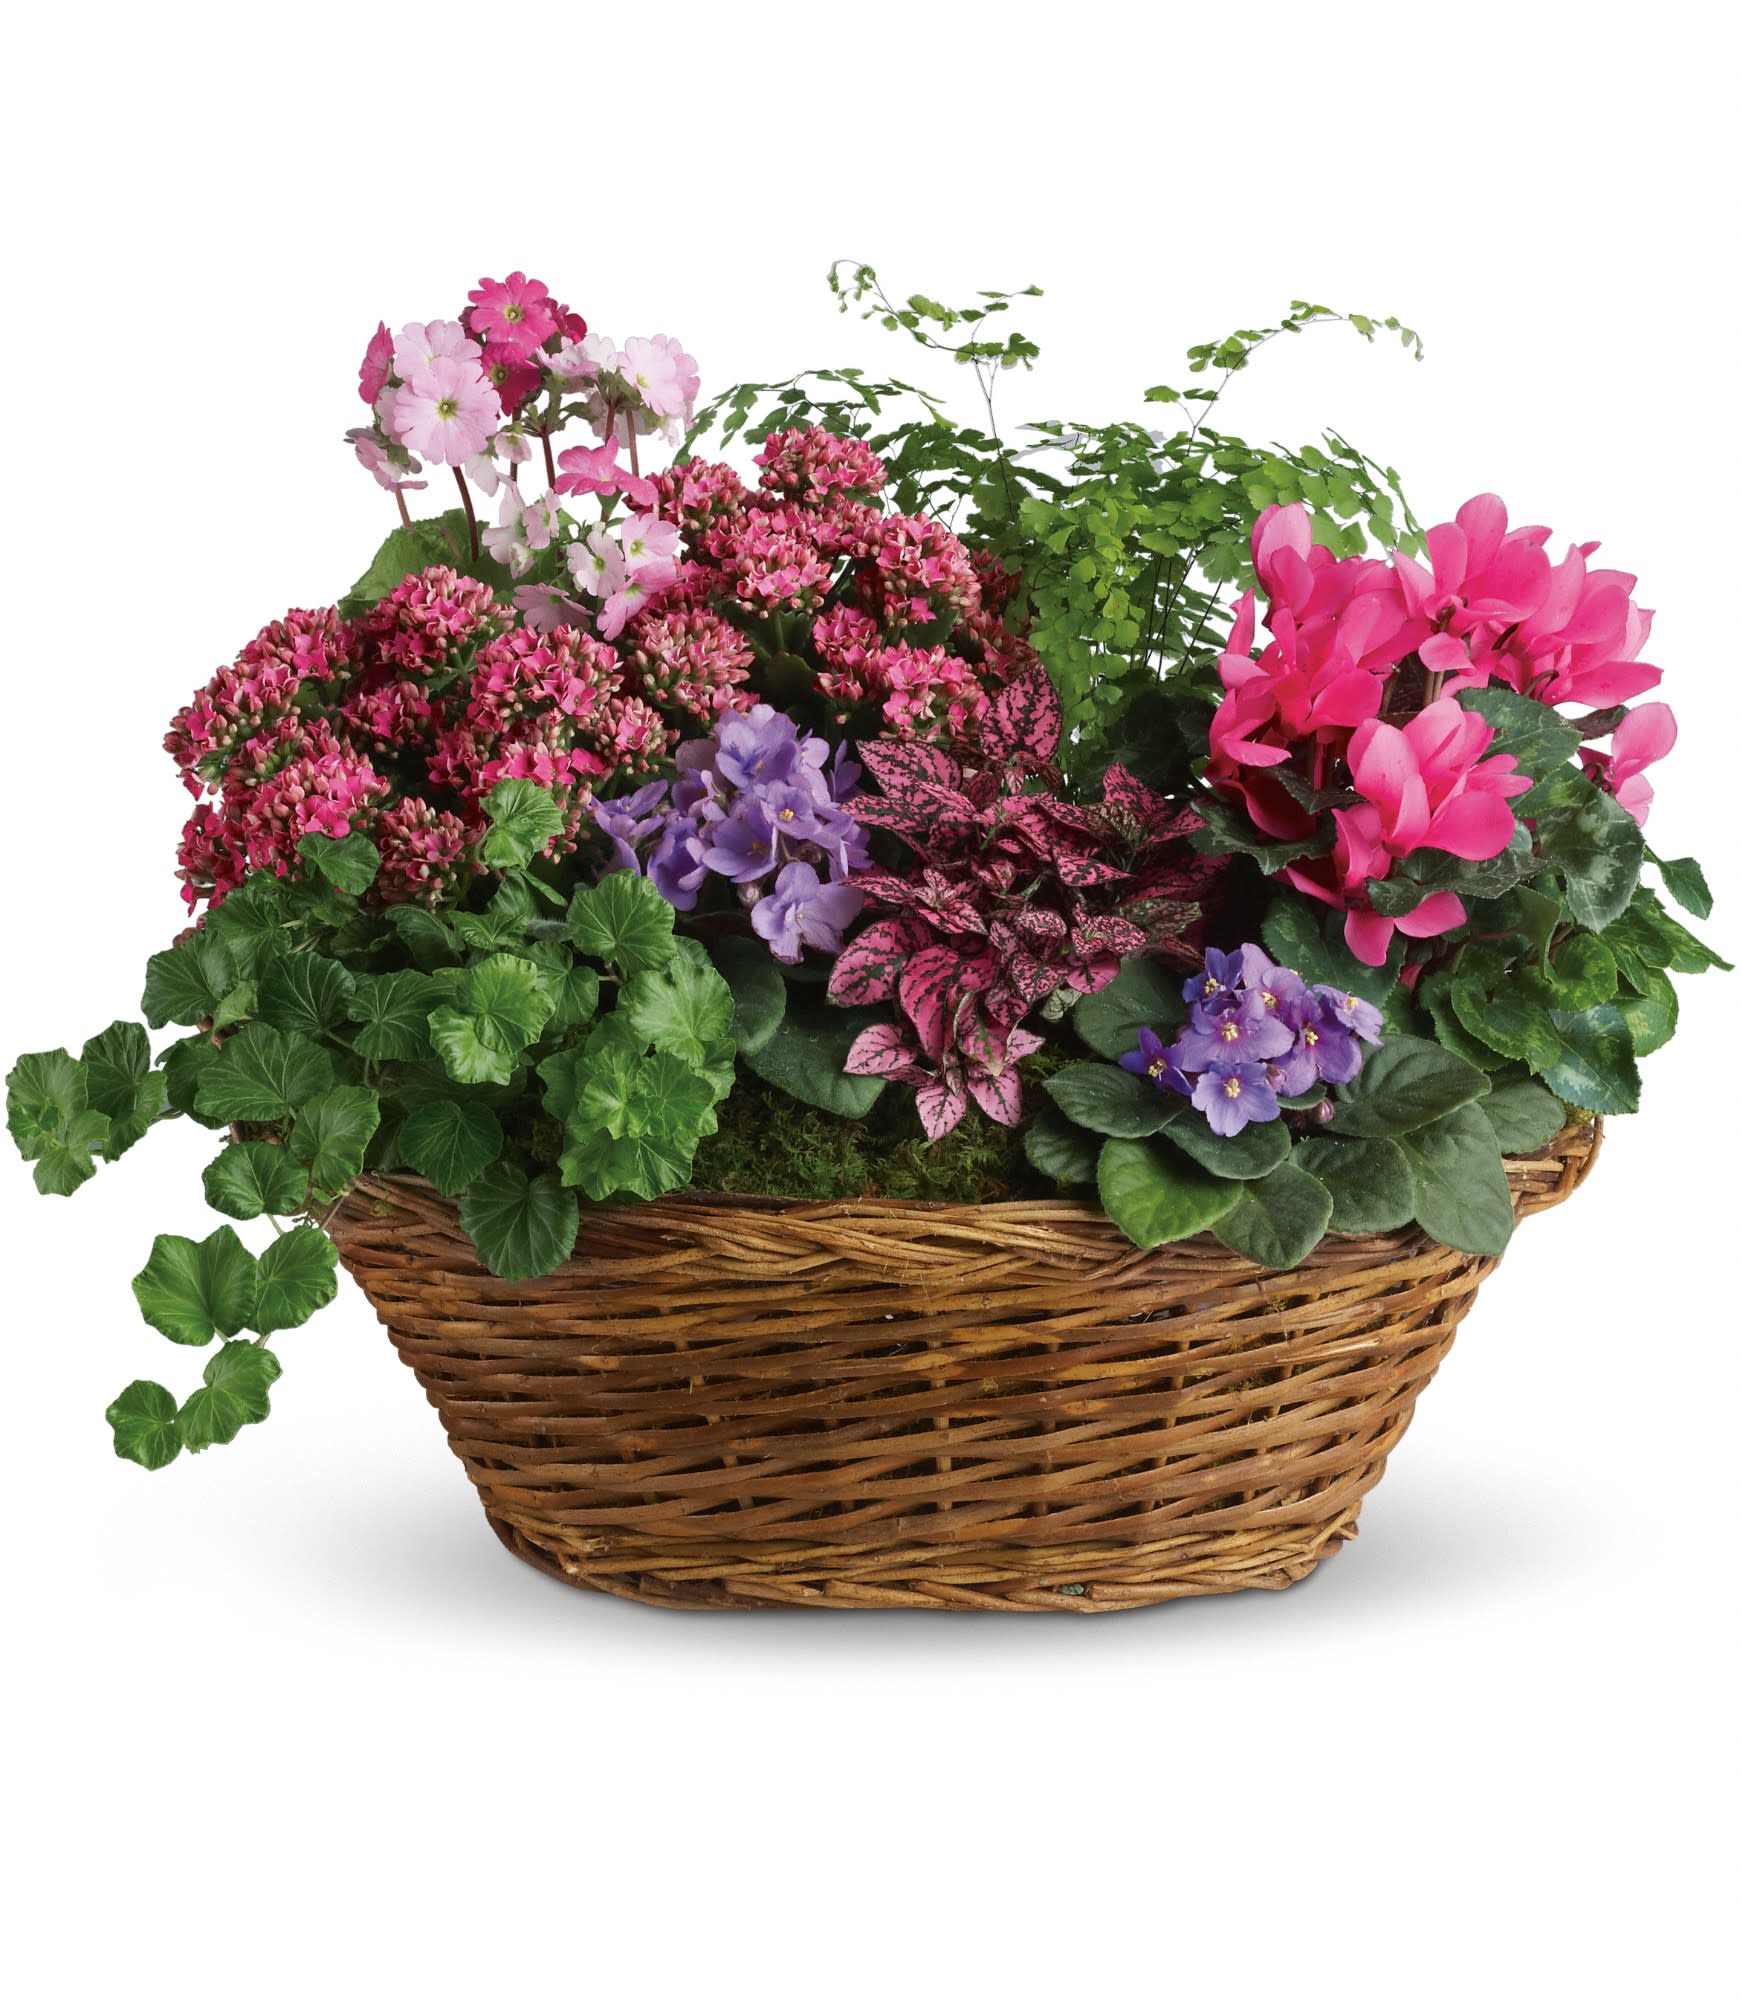 Simply Chic Mixed Plant Basket - Simply captivating. Simply charming. Simply chic. This pretty basket is overflowing with character - and live plants. It's colorful, natural and beautiful.    A charming oval wicker basket is full of flowering plants like two miniature lavender African violets, 2 pink kalanchoes, a hot pink cyclamen, a pink primrose and a hypoestes. Not to mention green ivy and maidenhair fern. A fantastic mix for anyone!    Approximately 24 1/2&quot; W x 19 1/4&quot; H    Orientation: All-Around        As Shown : T97-1A    